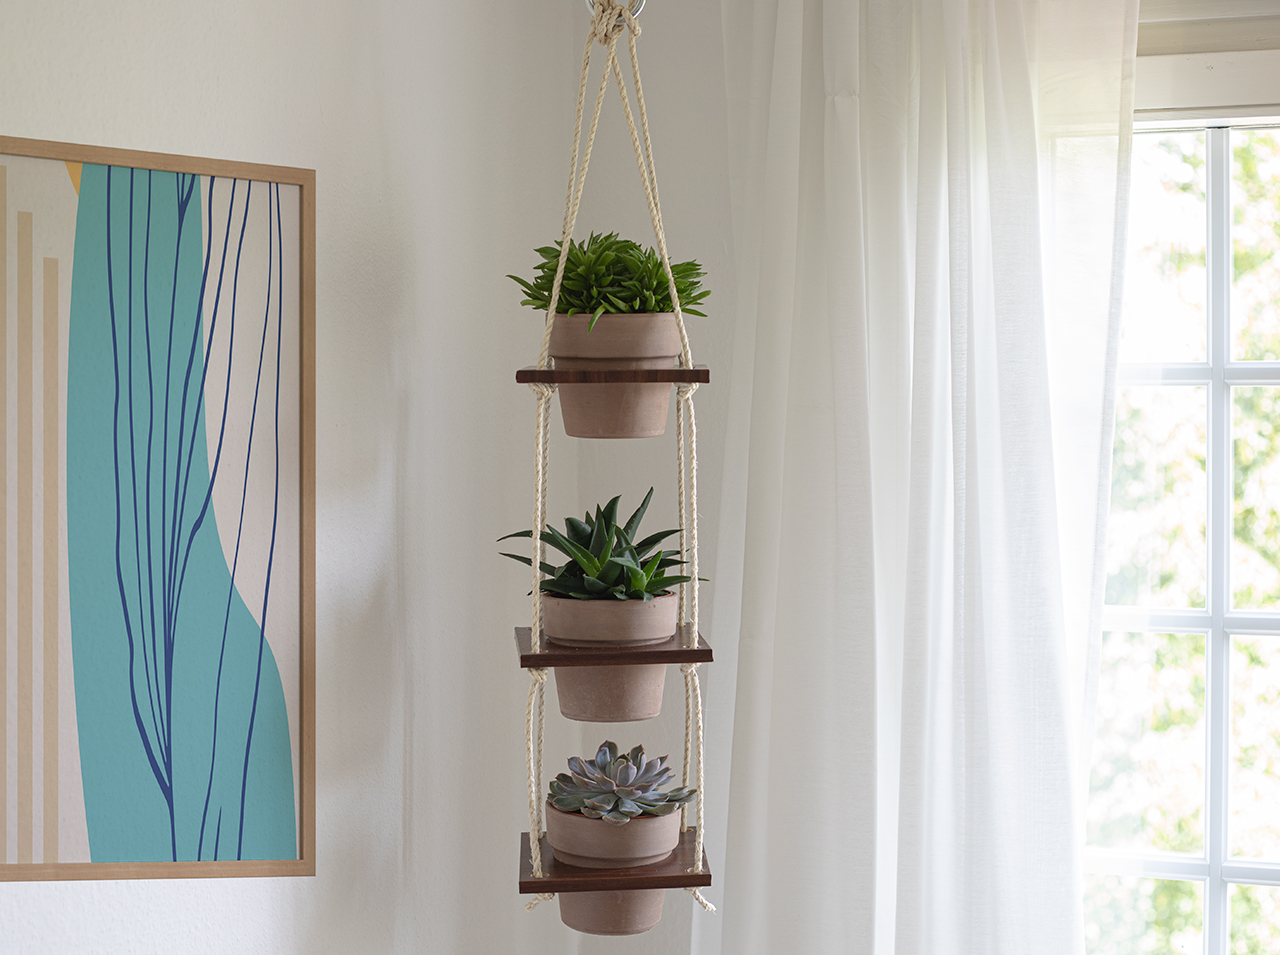 A shelf hanging from the ceiling made of three square wooden panels covered with wood-effect foil in walnut look, attached to four cords, and which the plant pots are inserted into.